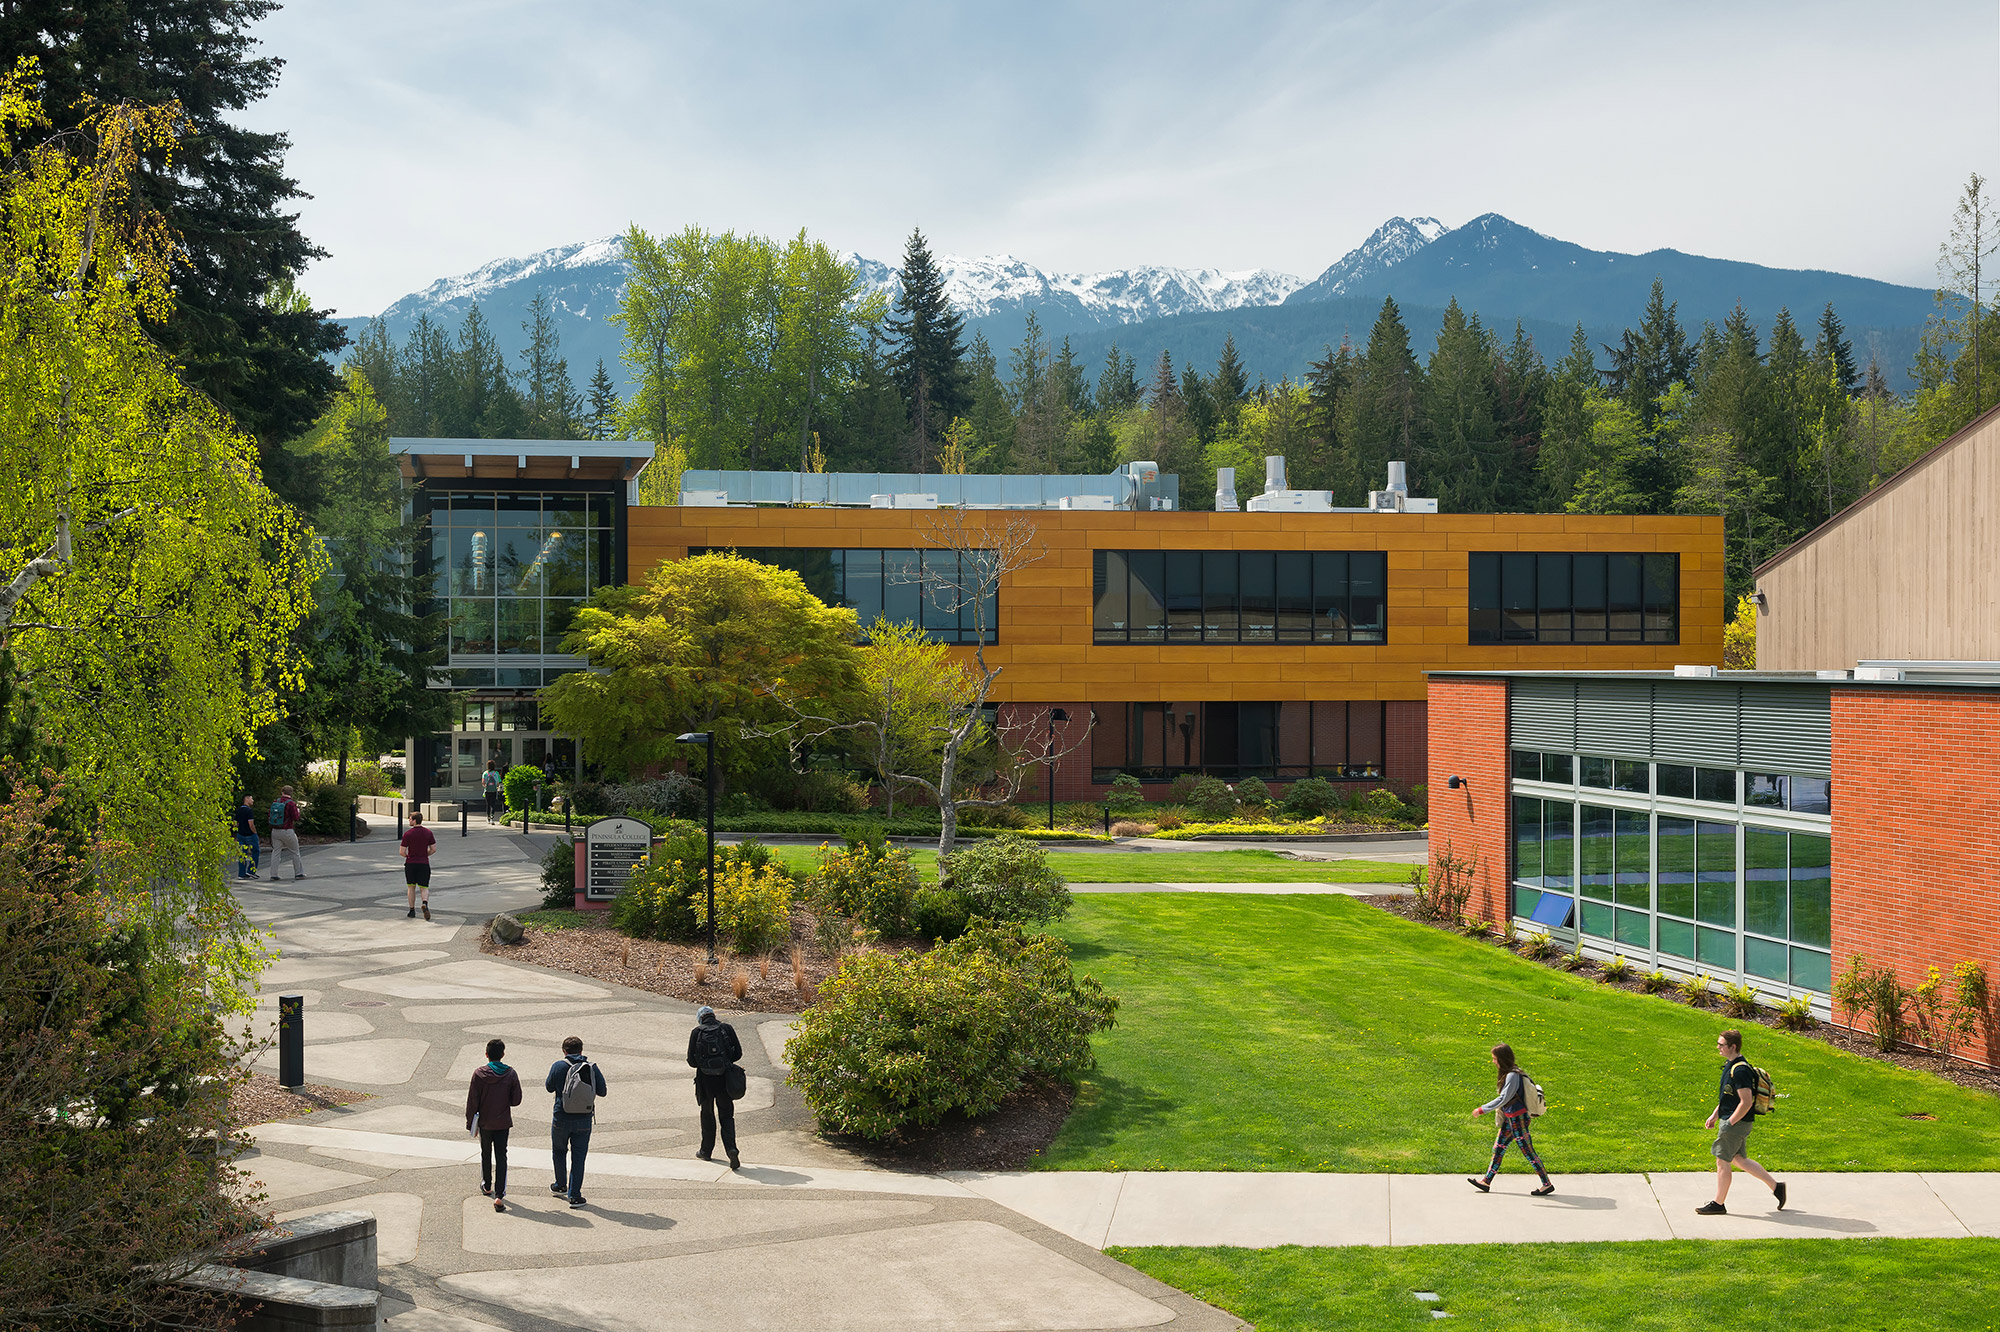 Students walking outside on campus with mountains and trees in the background